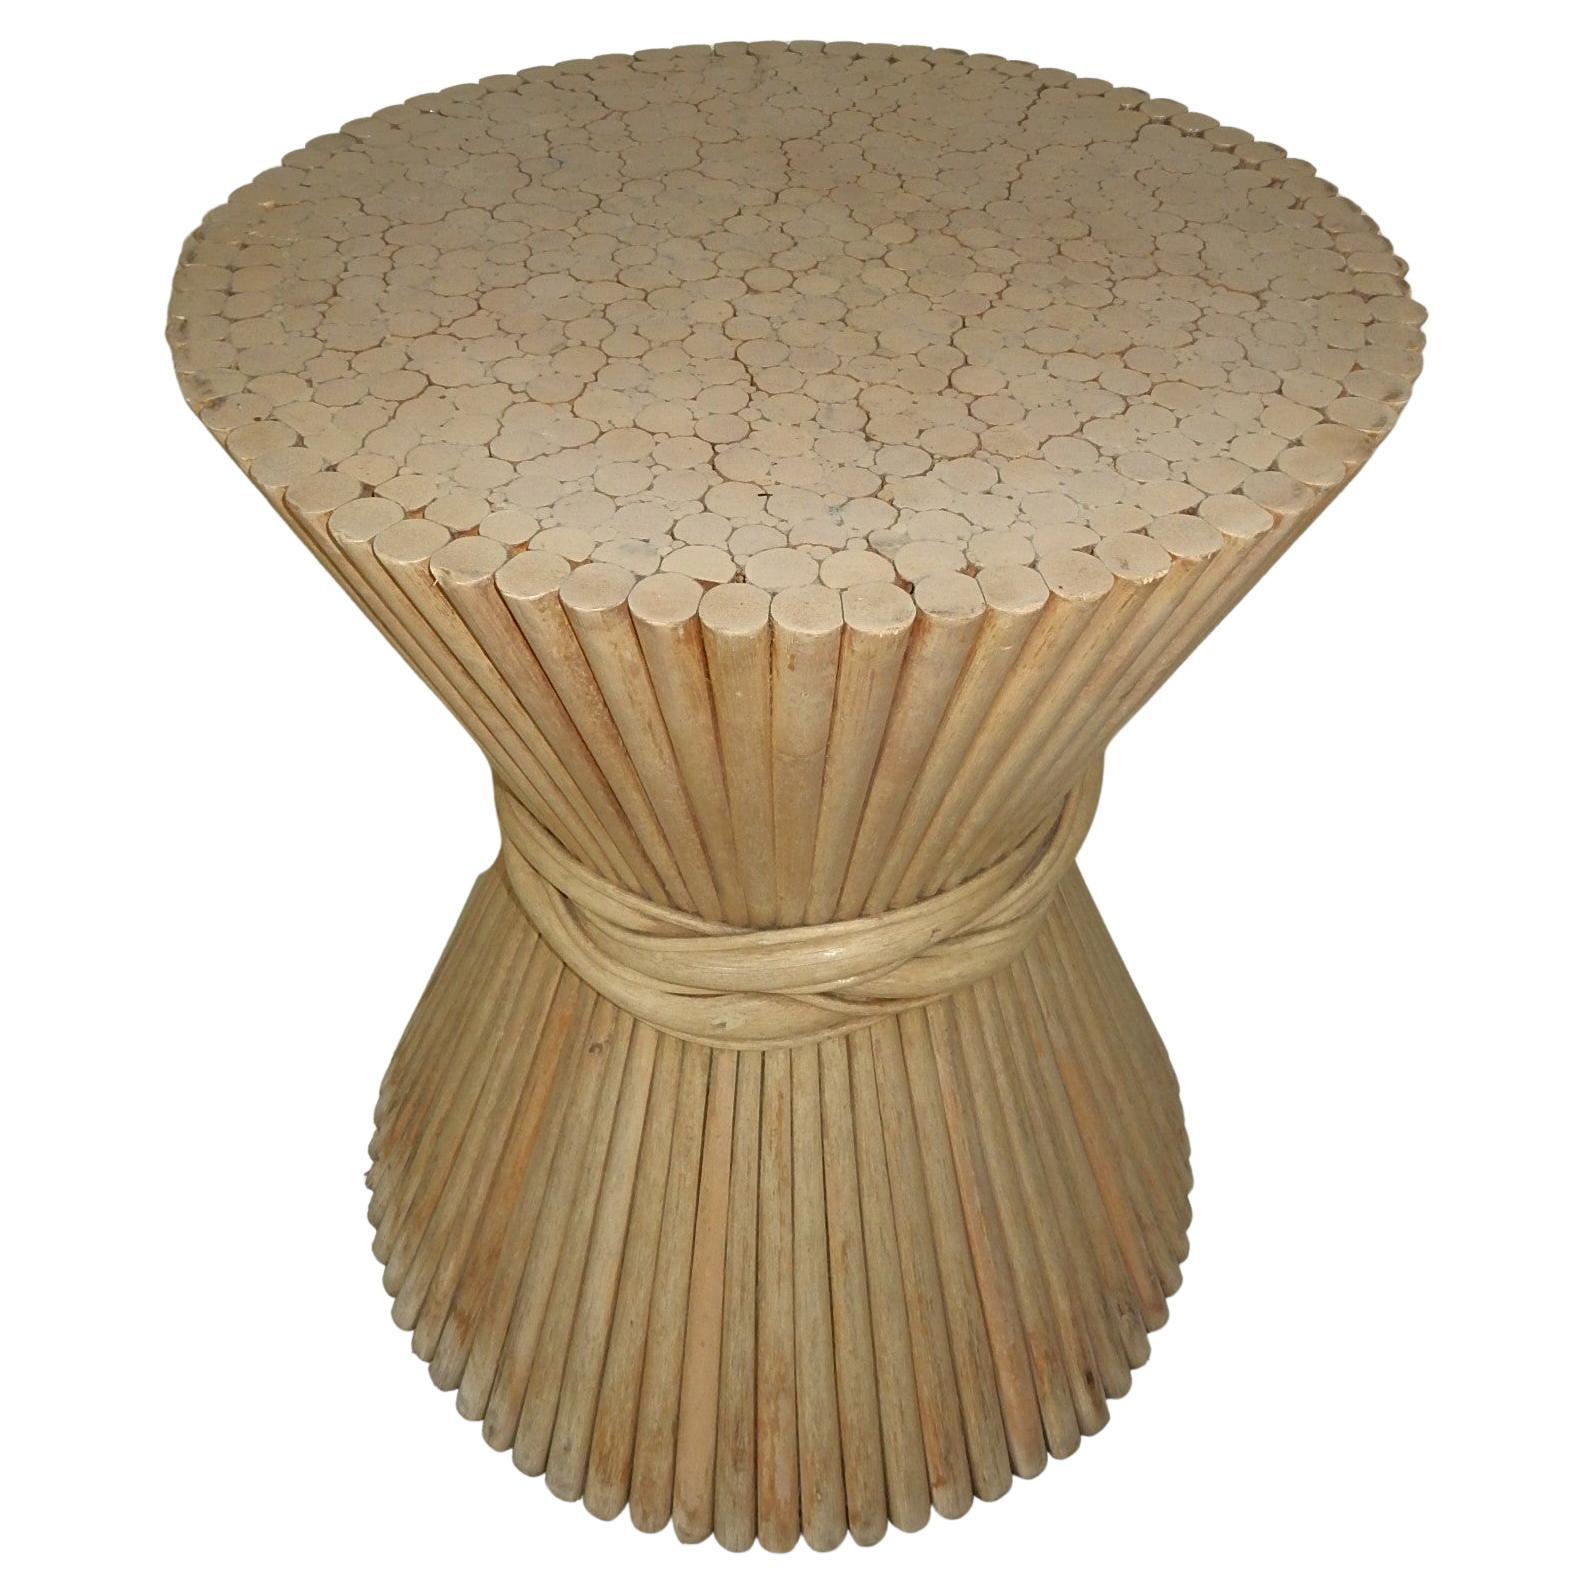 Sculpted Rattan Dining Table Base Pedestal circa 1960's In Good Condition For Sale In Las Vegas, NV